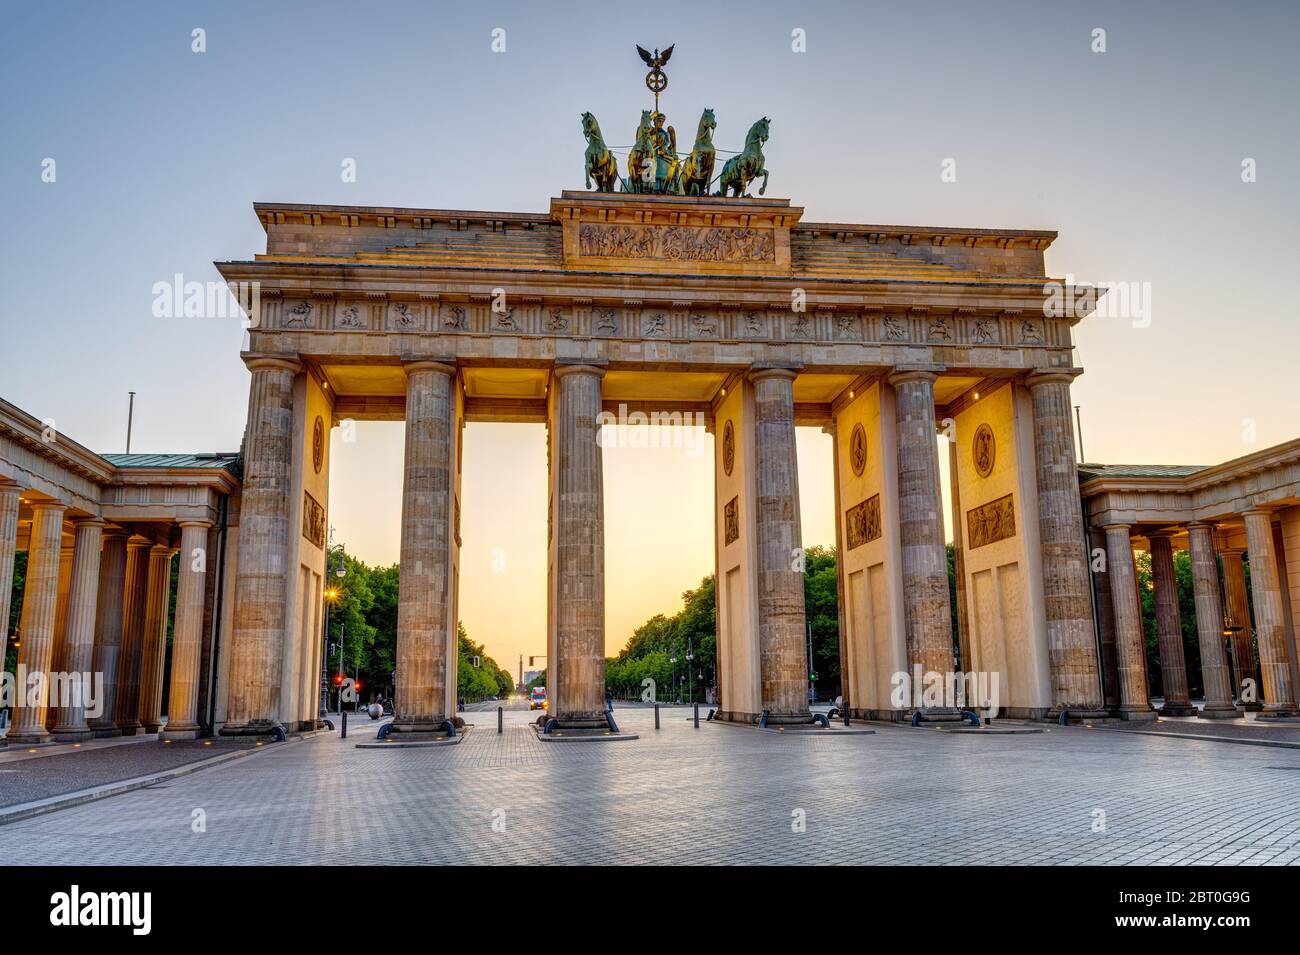 The historic Brandenburg Gate in Berlin at sunset with no people Stock Photo